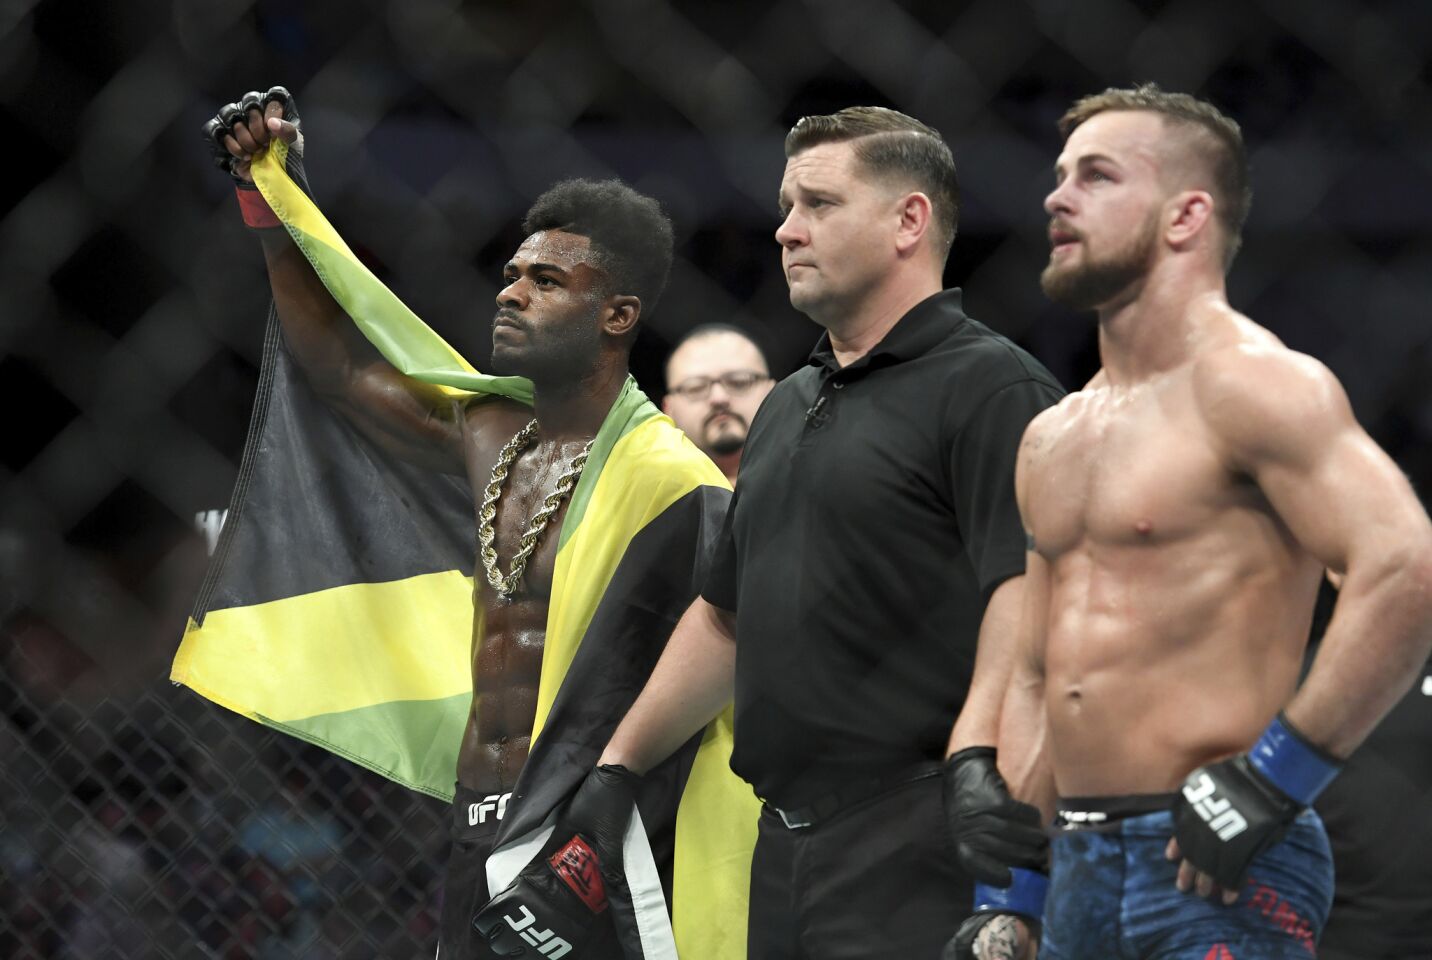 Aljamain Sterling, left, is acknowledged as the winner of his UFC welterweight mixed martial arts bout against Cody Stamann, right, at UFC 228 on Saturday, Sept. 8, 2018, in Dallas. (AP Photo/Jeffrey McWhorter)